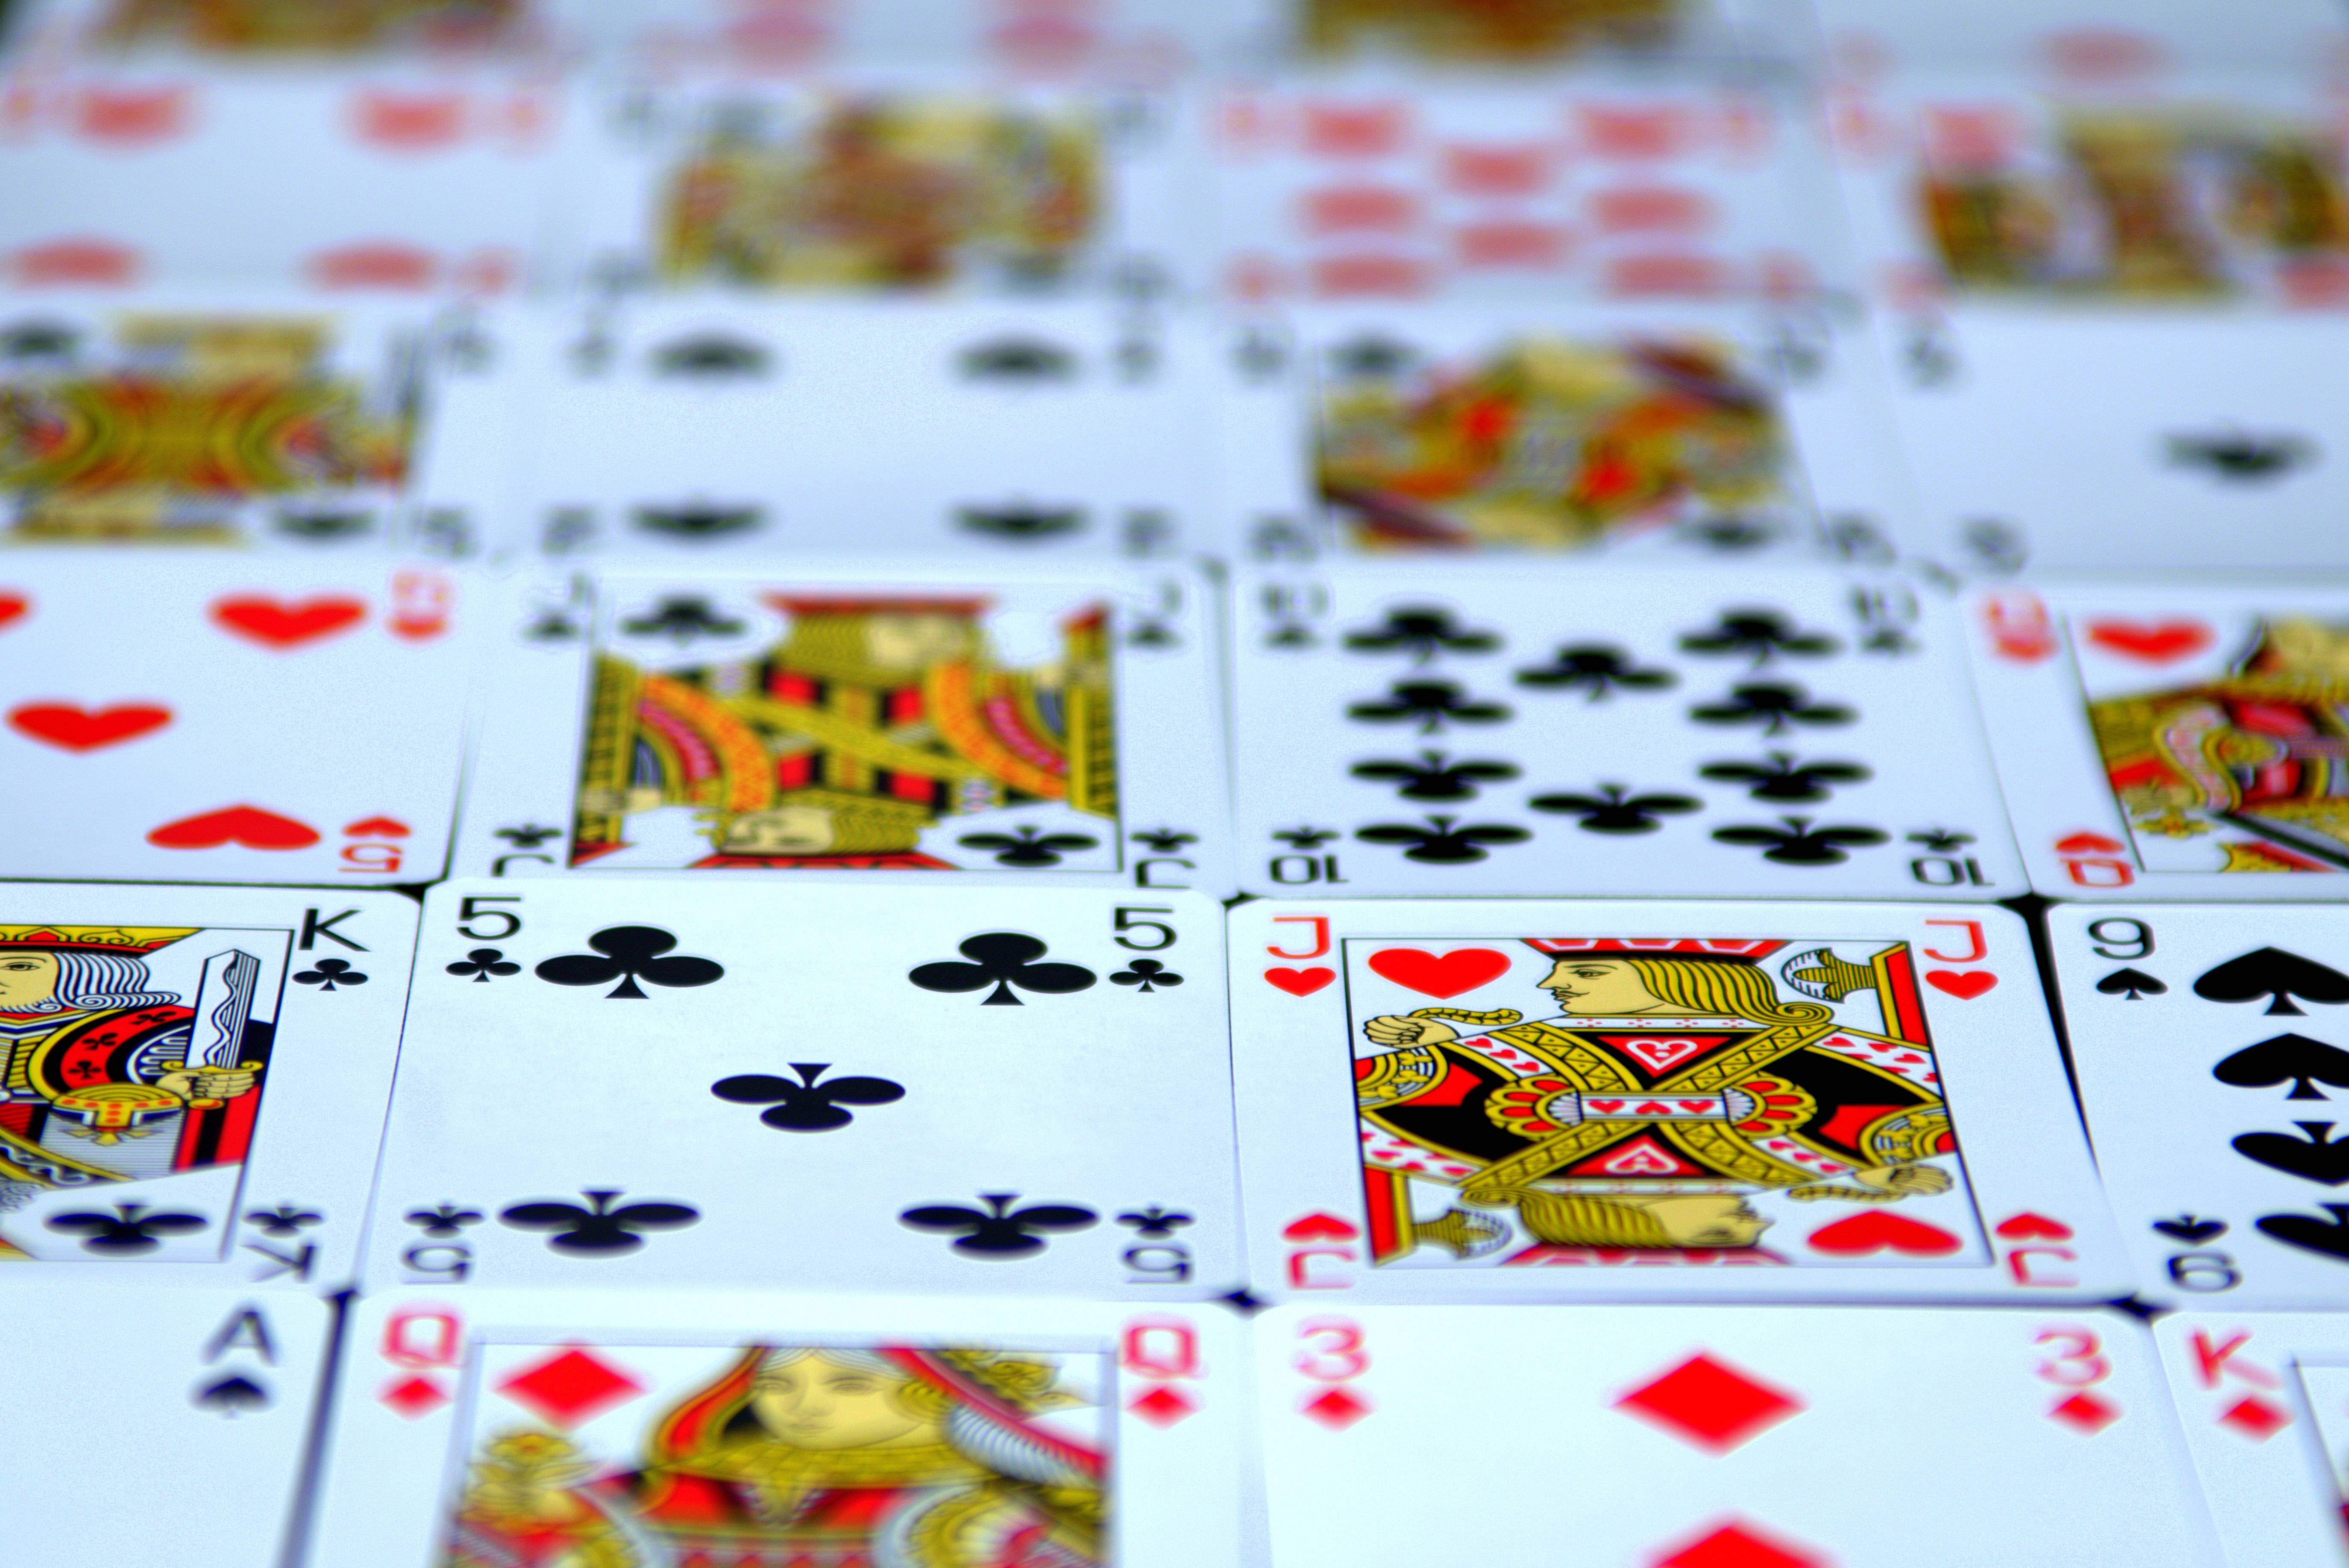 poker-cards-all-laid-out-on-the-table